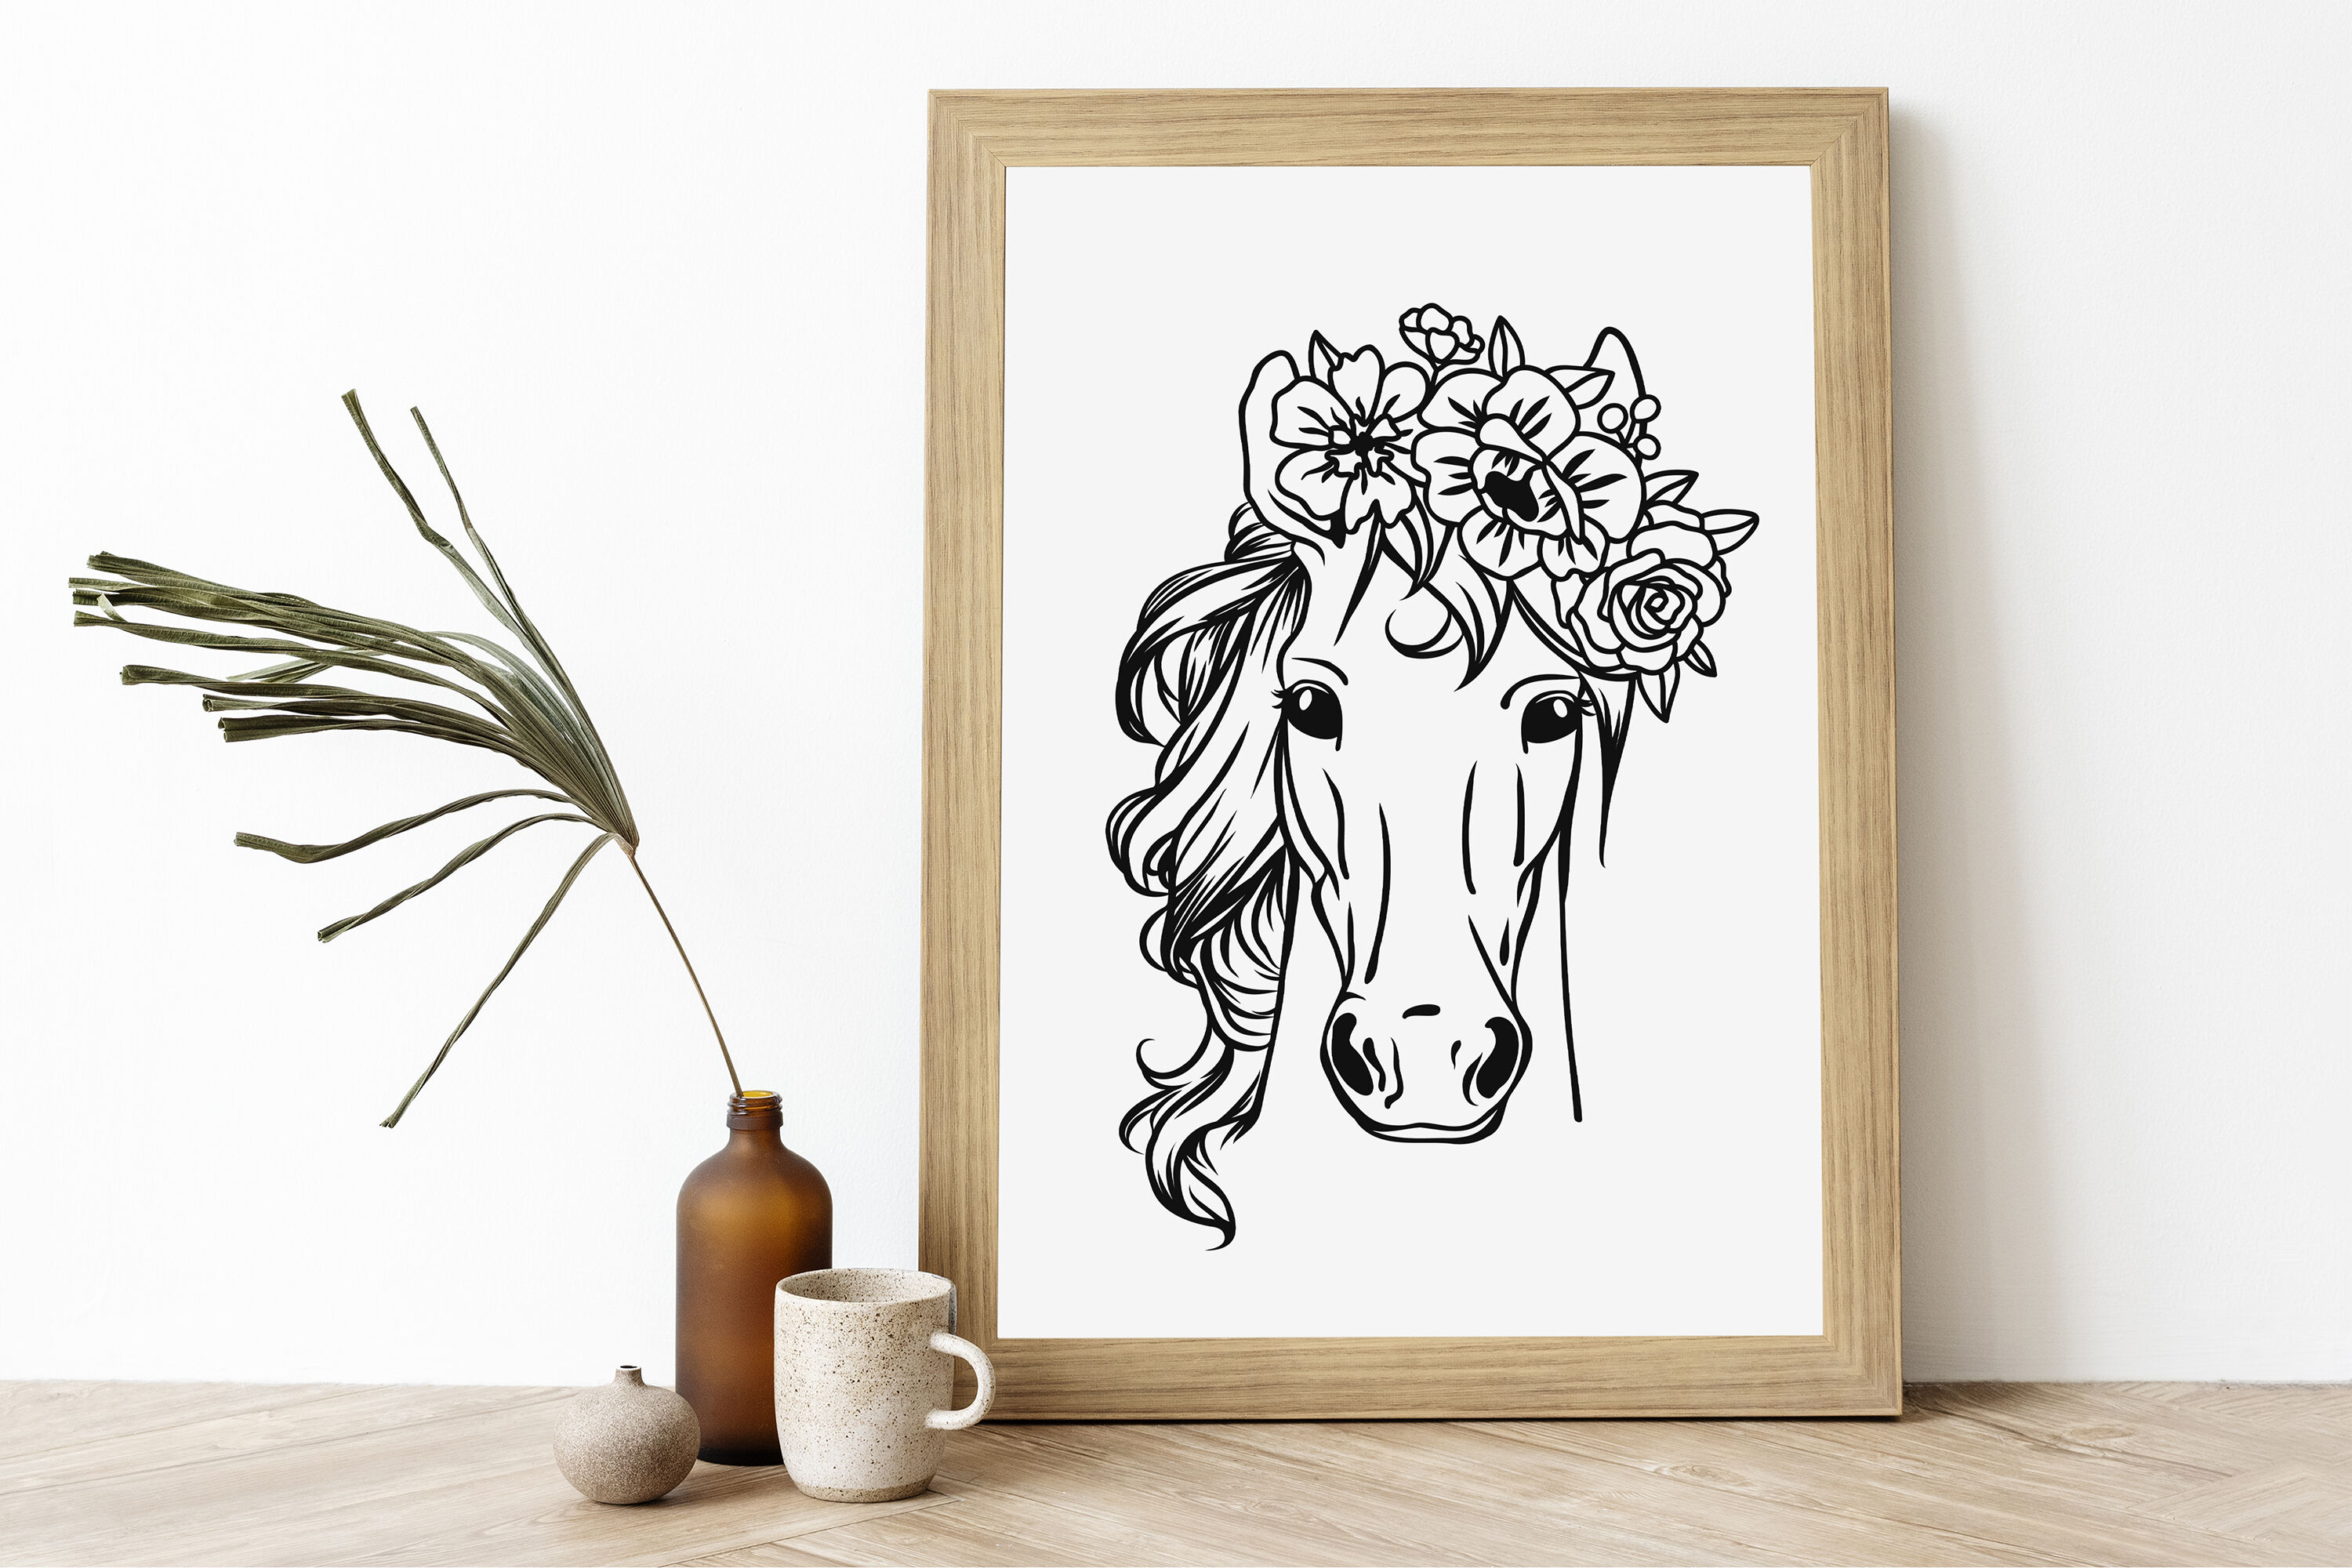 Download Horse With Flower Crown Svg Floral Horse Svg Horse Head By Pretty Meerkat Thehungryjpeg Com